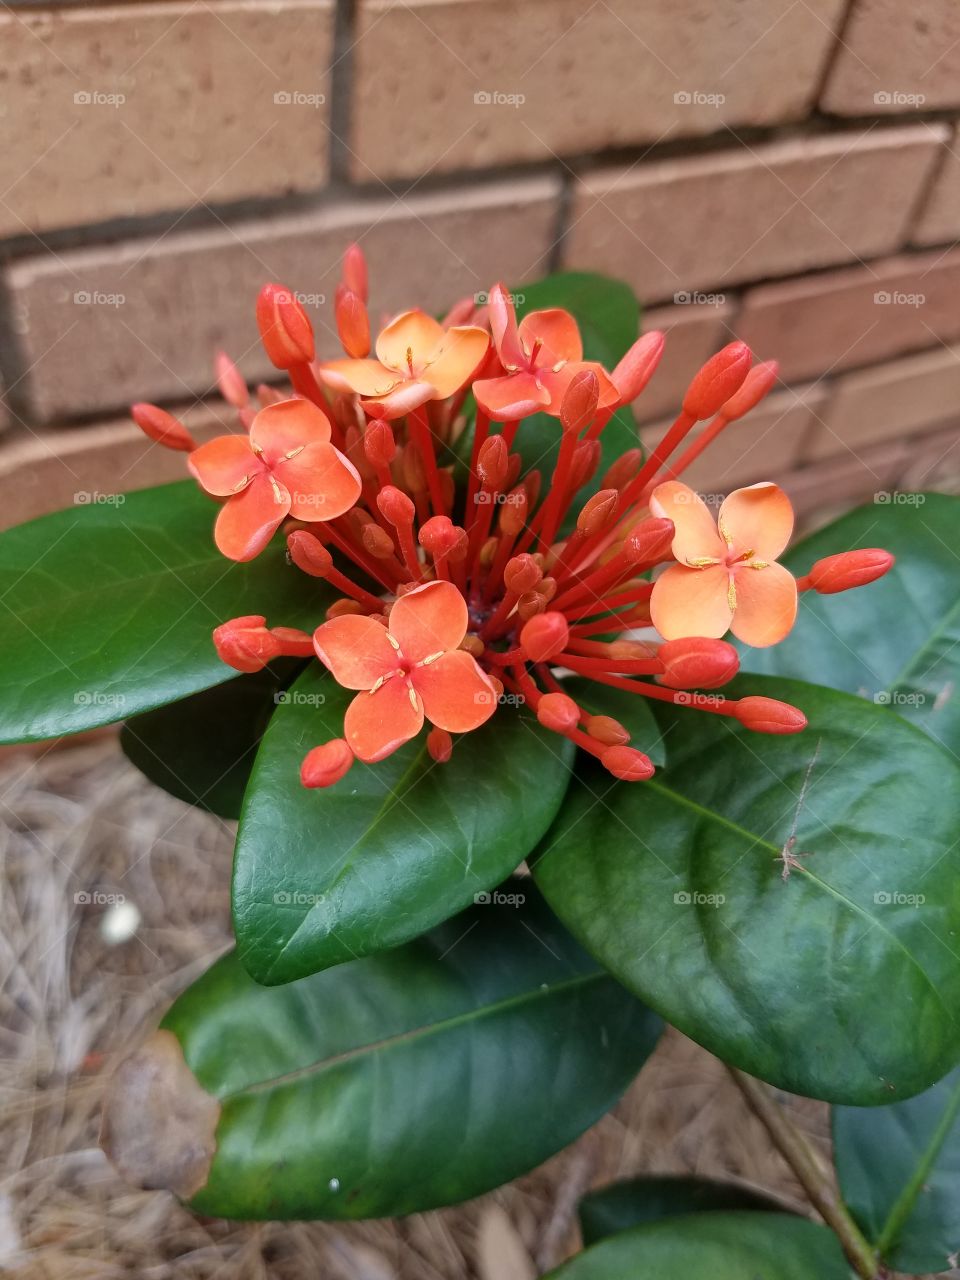 bright peach flowers, not sure type